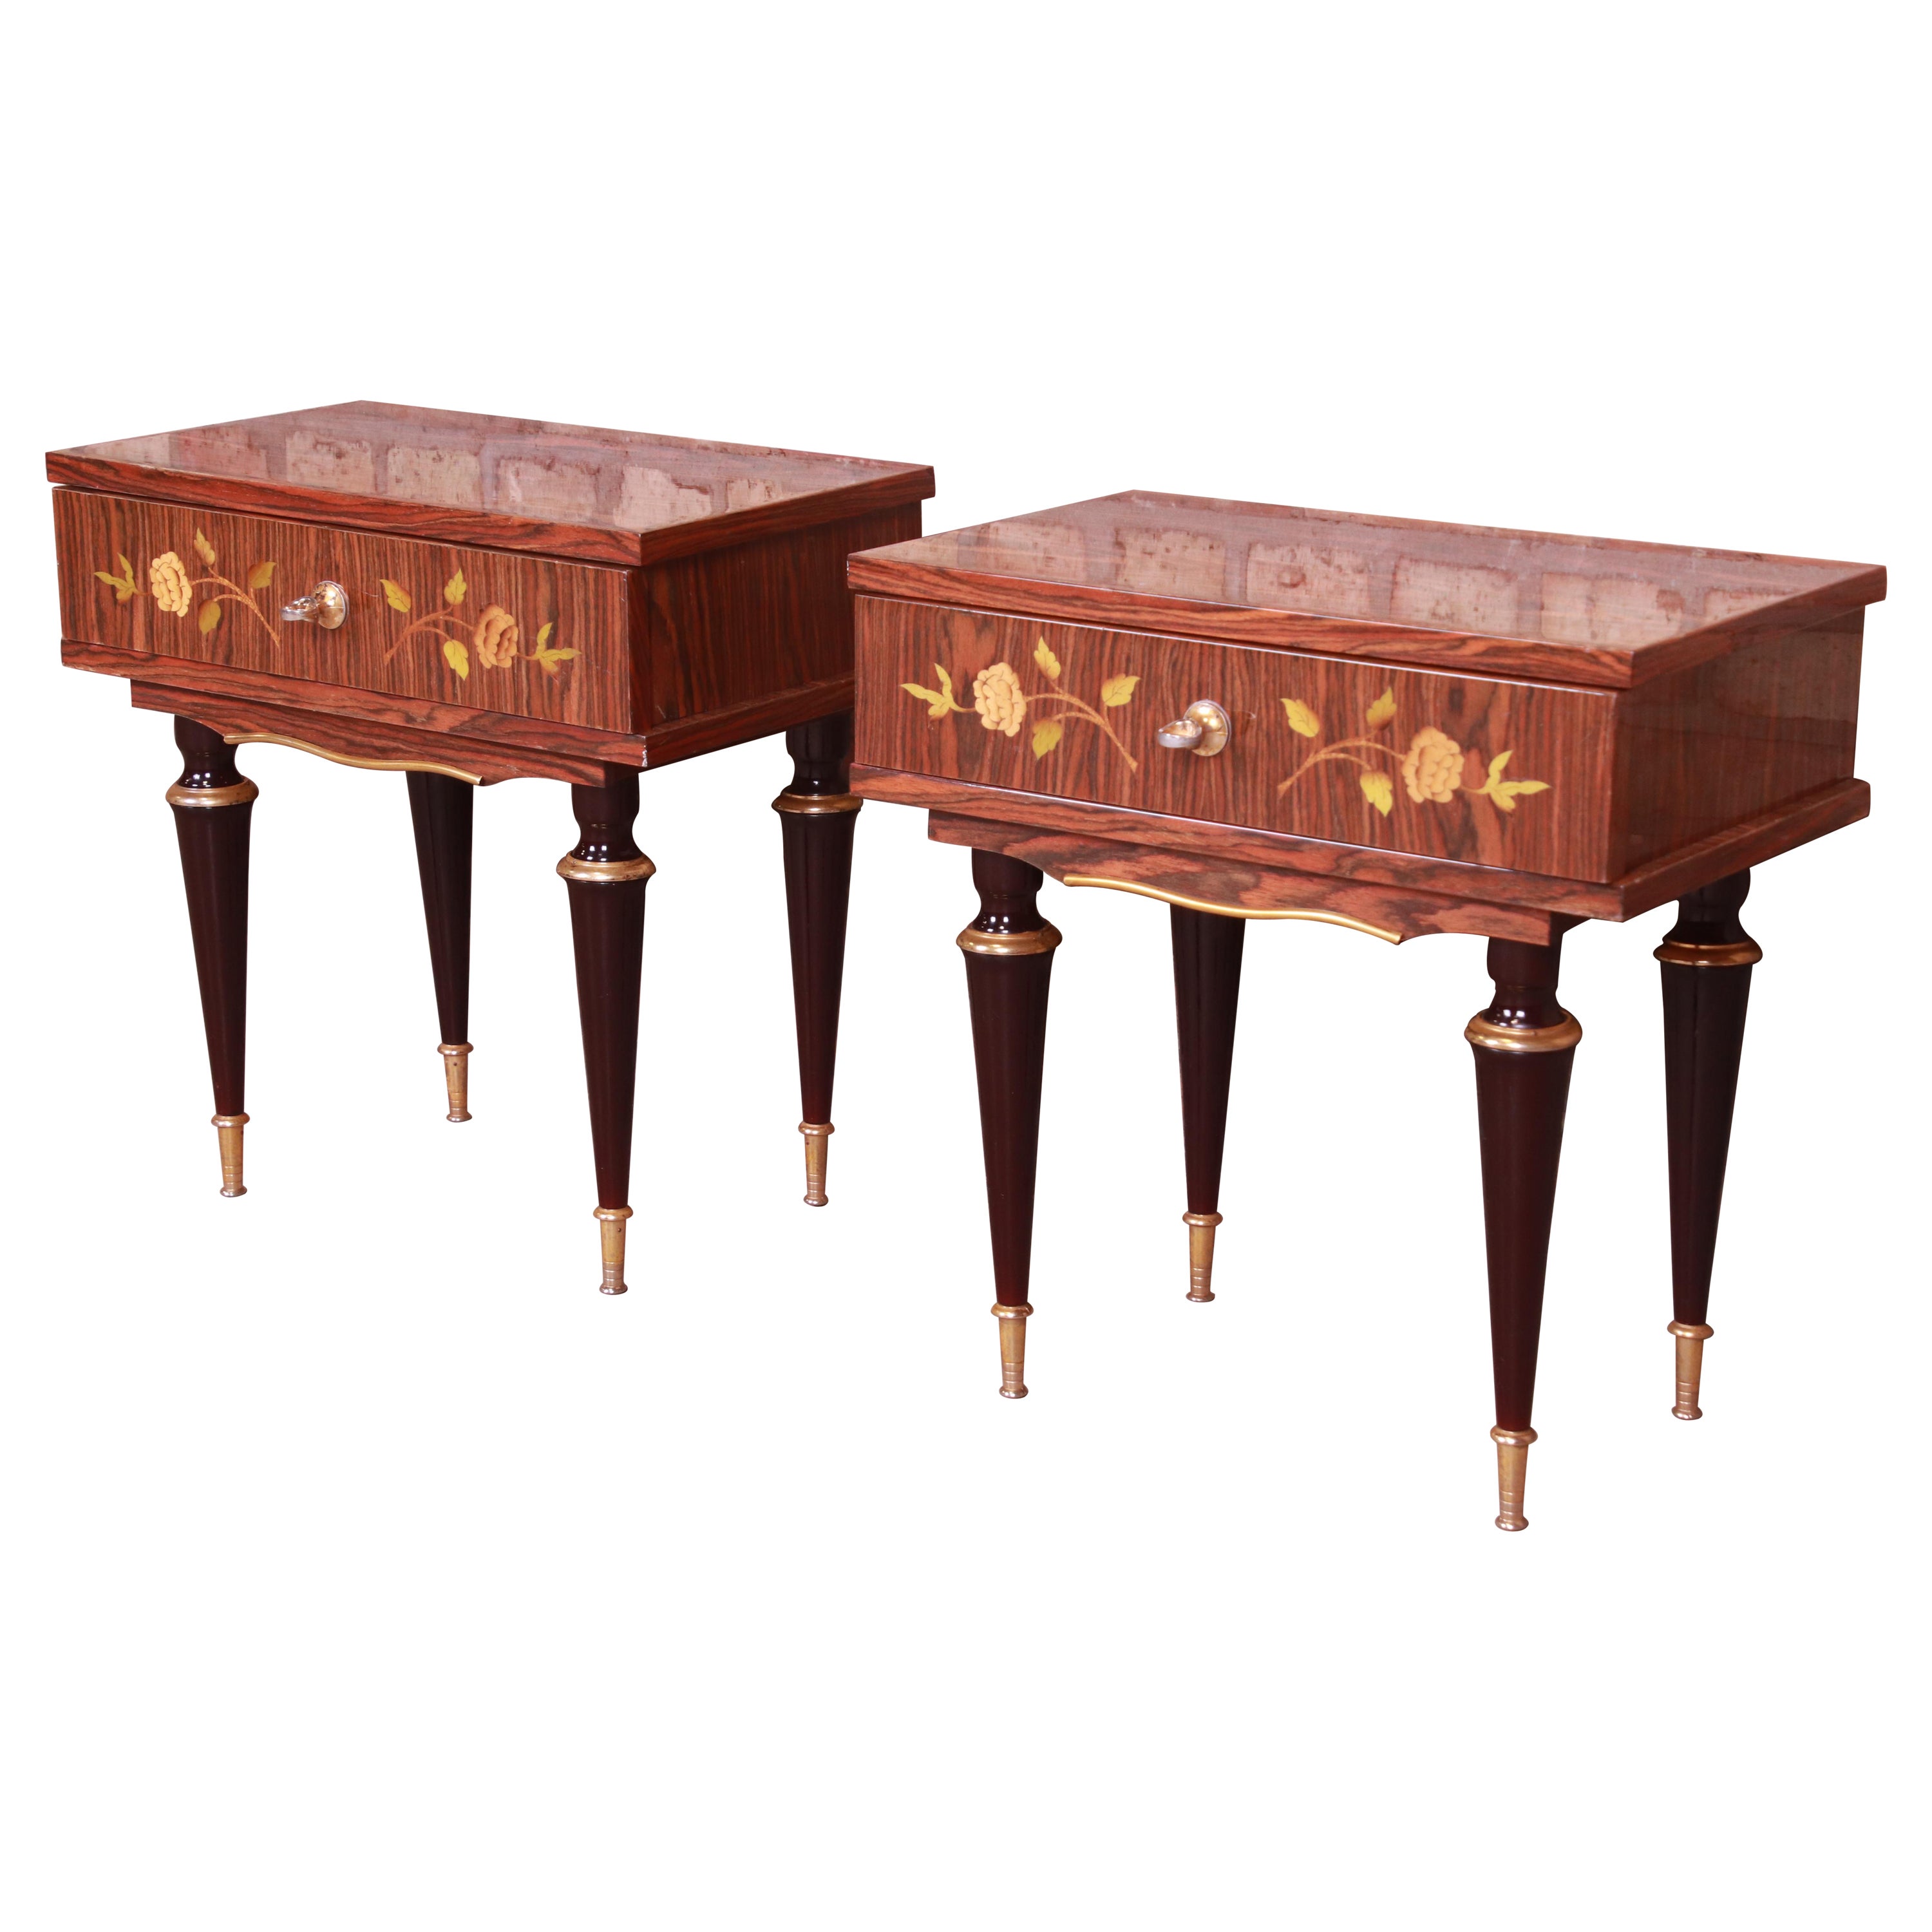 French Art Deco Macassar Ebony Inlaid Marquetry Nightstands, Circa 1950s For Sale